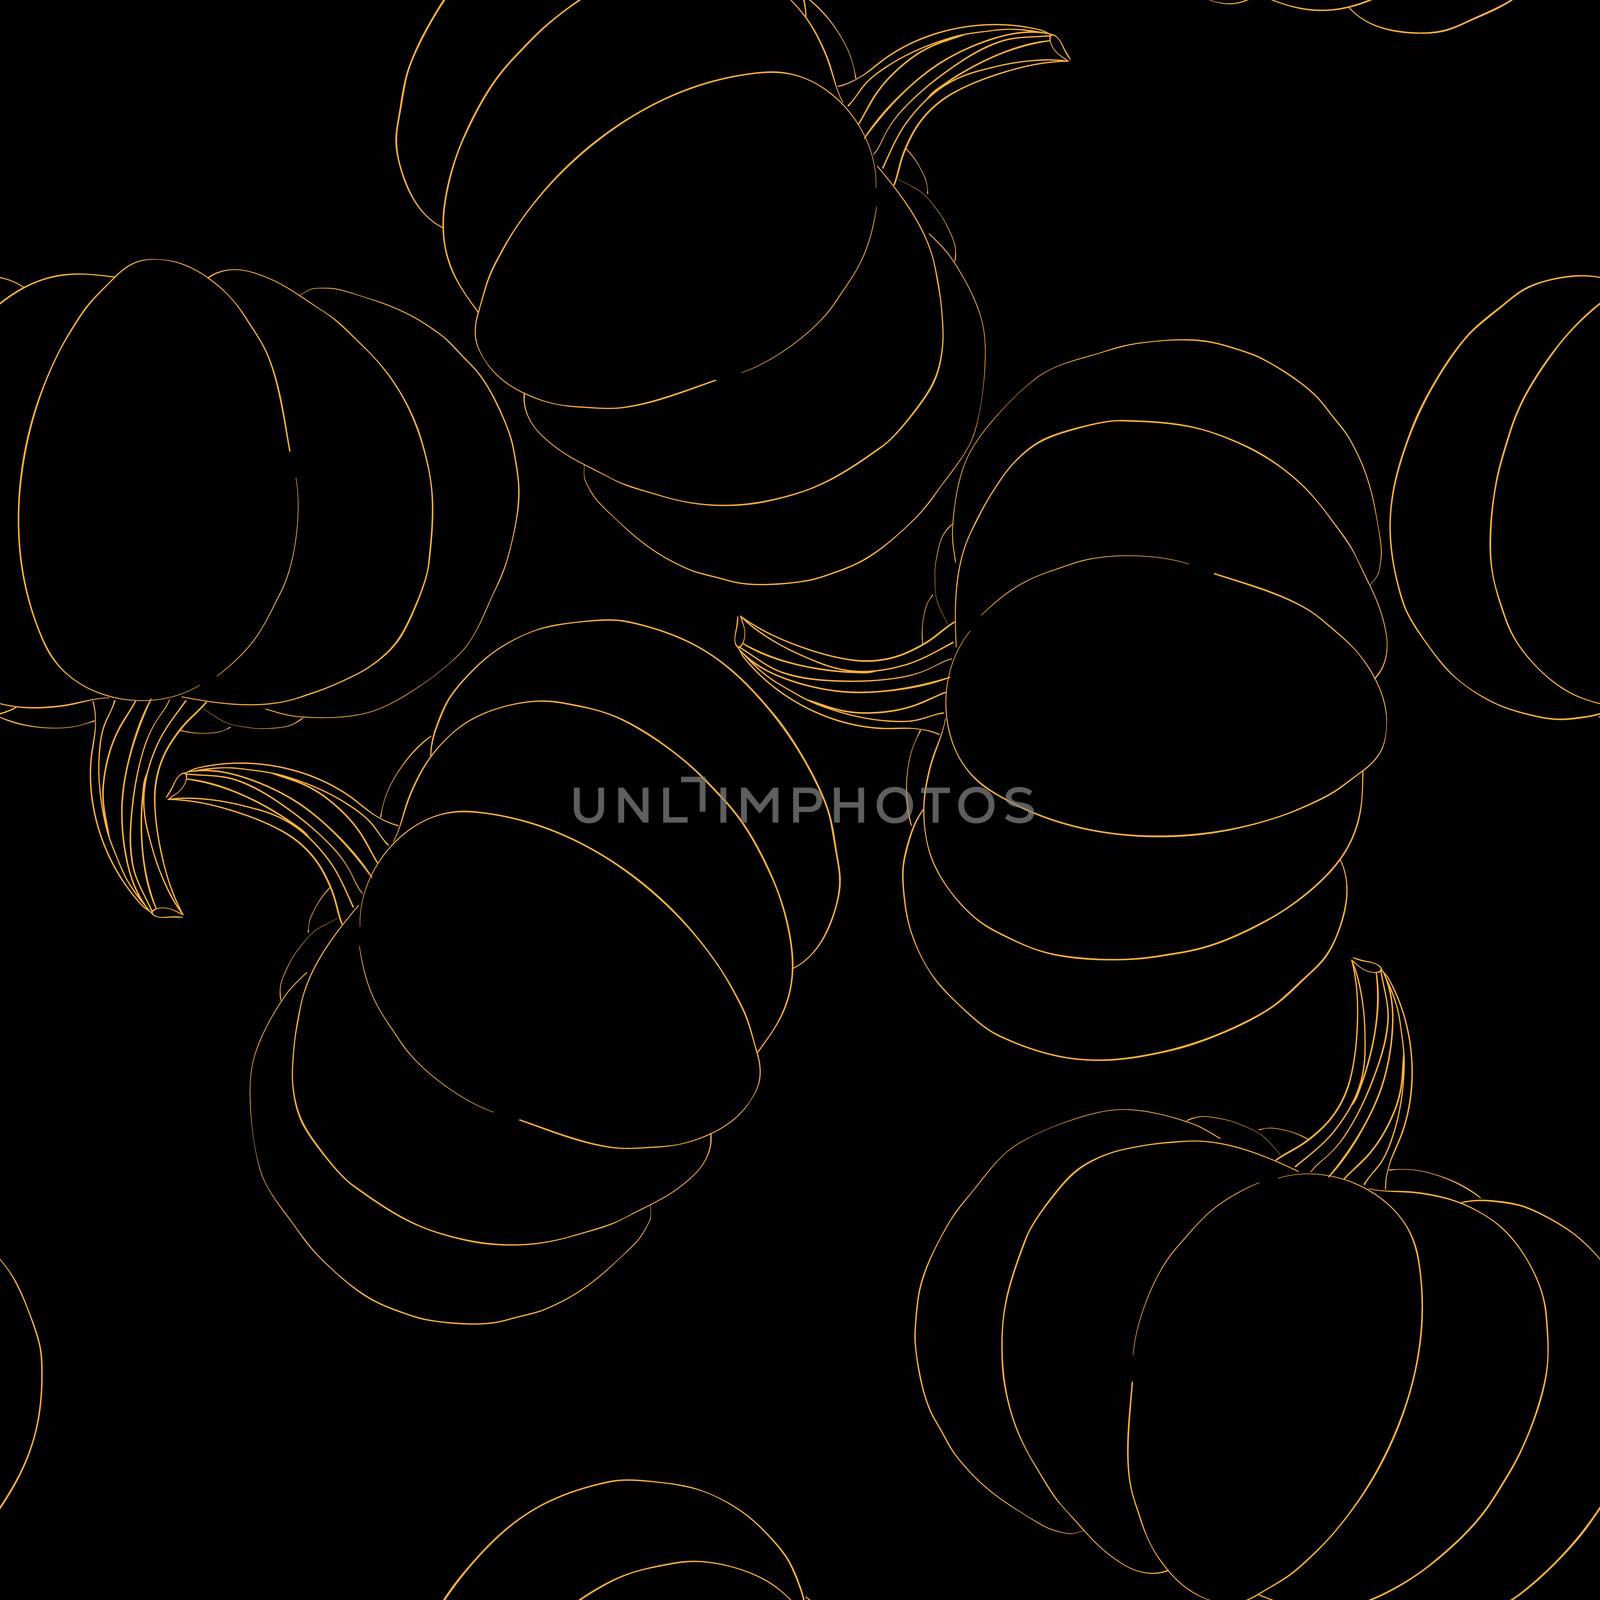 Seamless pattern with pumpkins over a black background, Halloween or Thanksgiving illustration